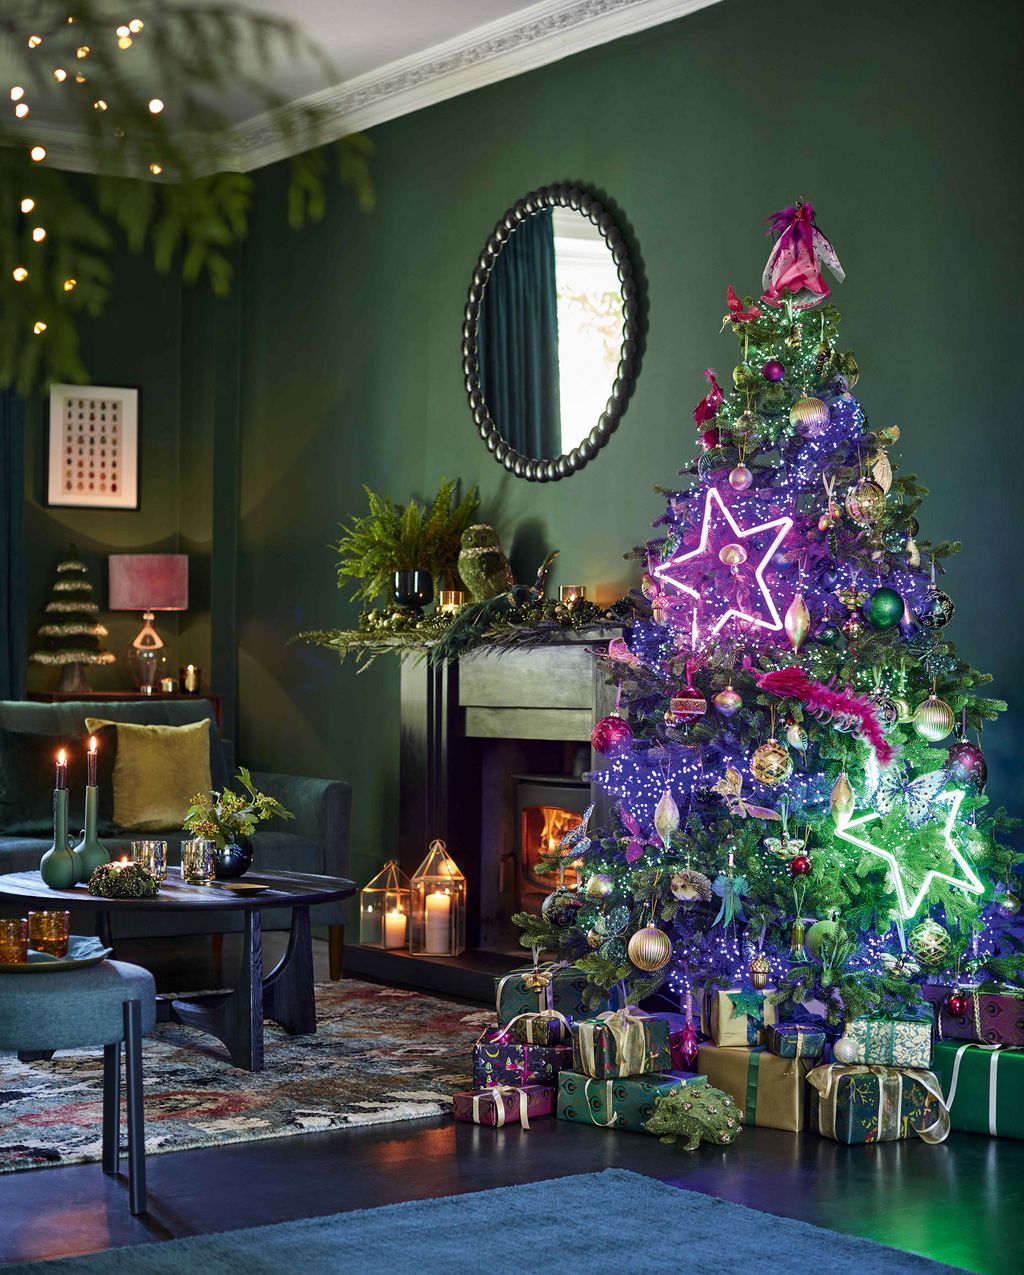 10 stylish Christmas color schemes to try this year | Real Homes